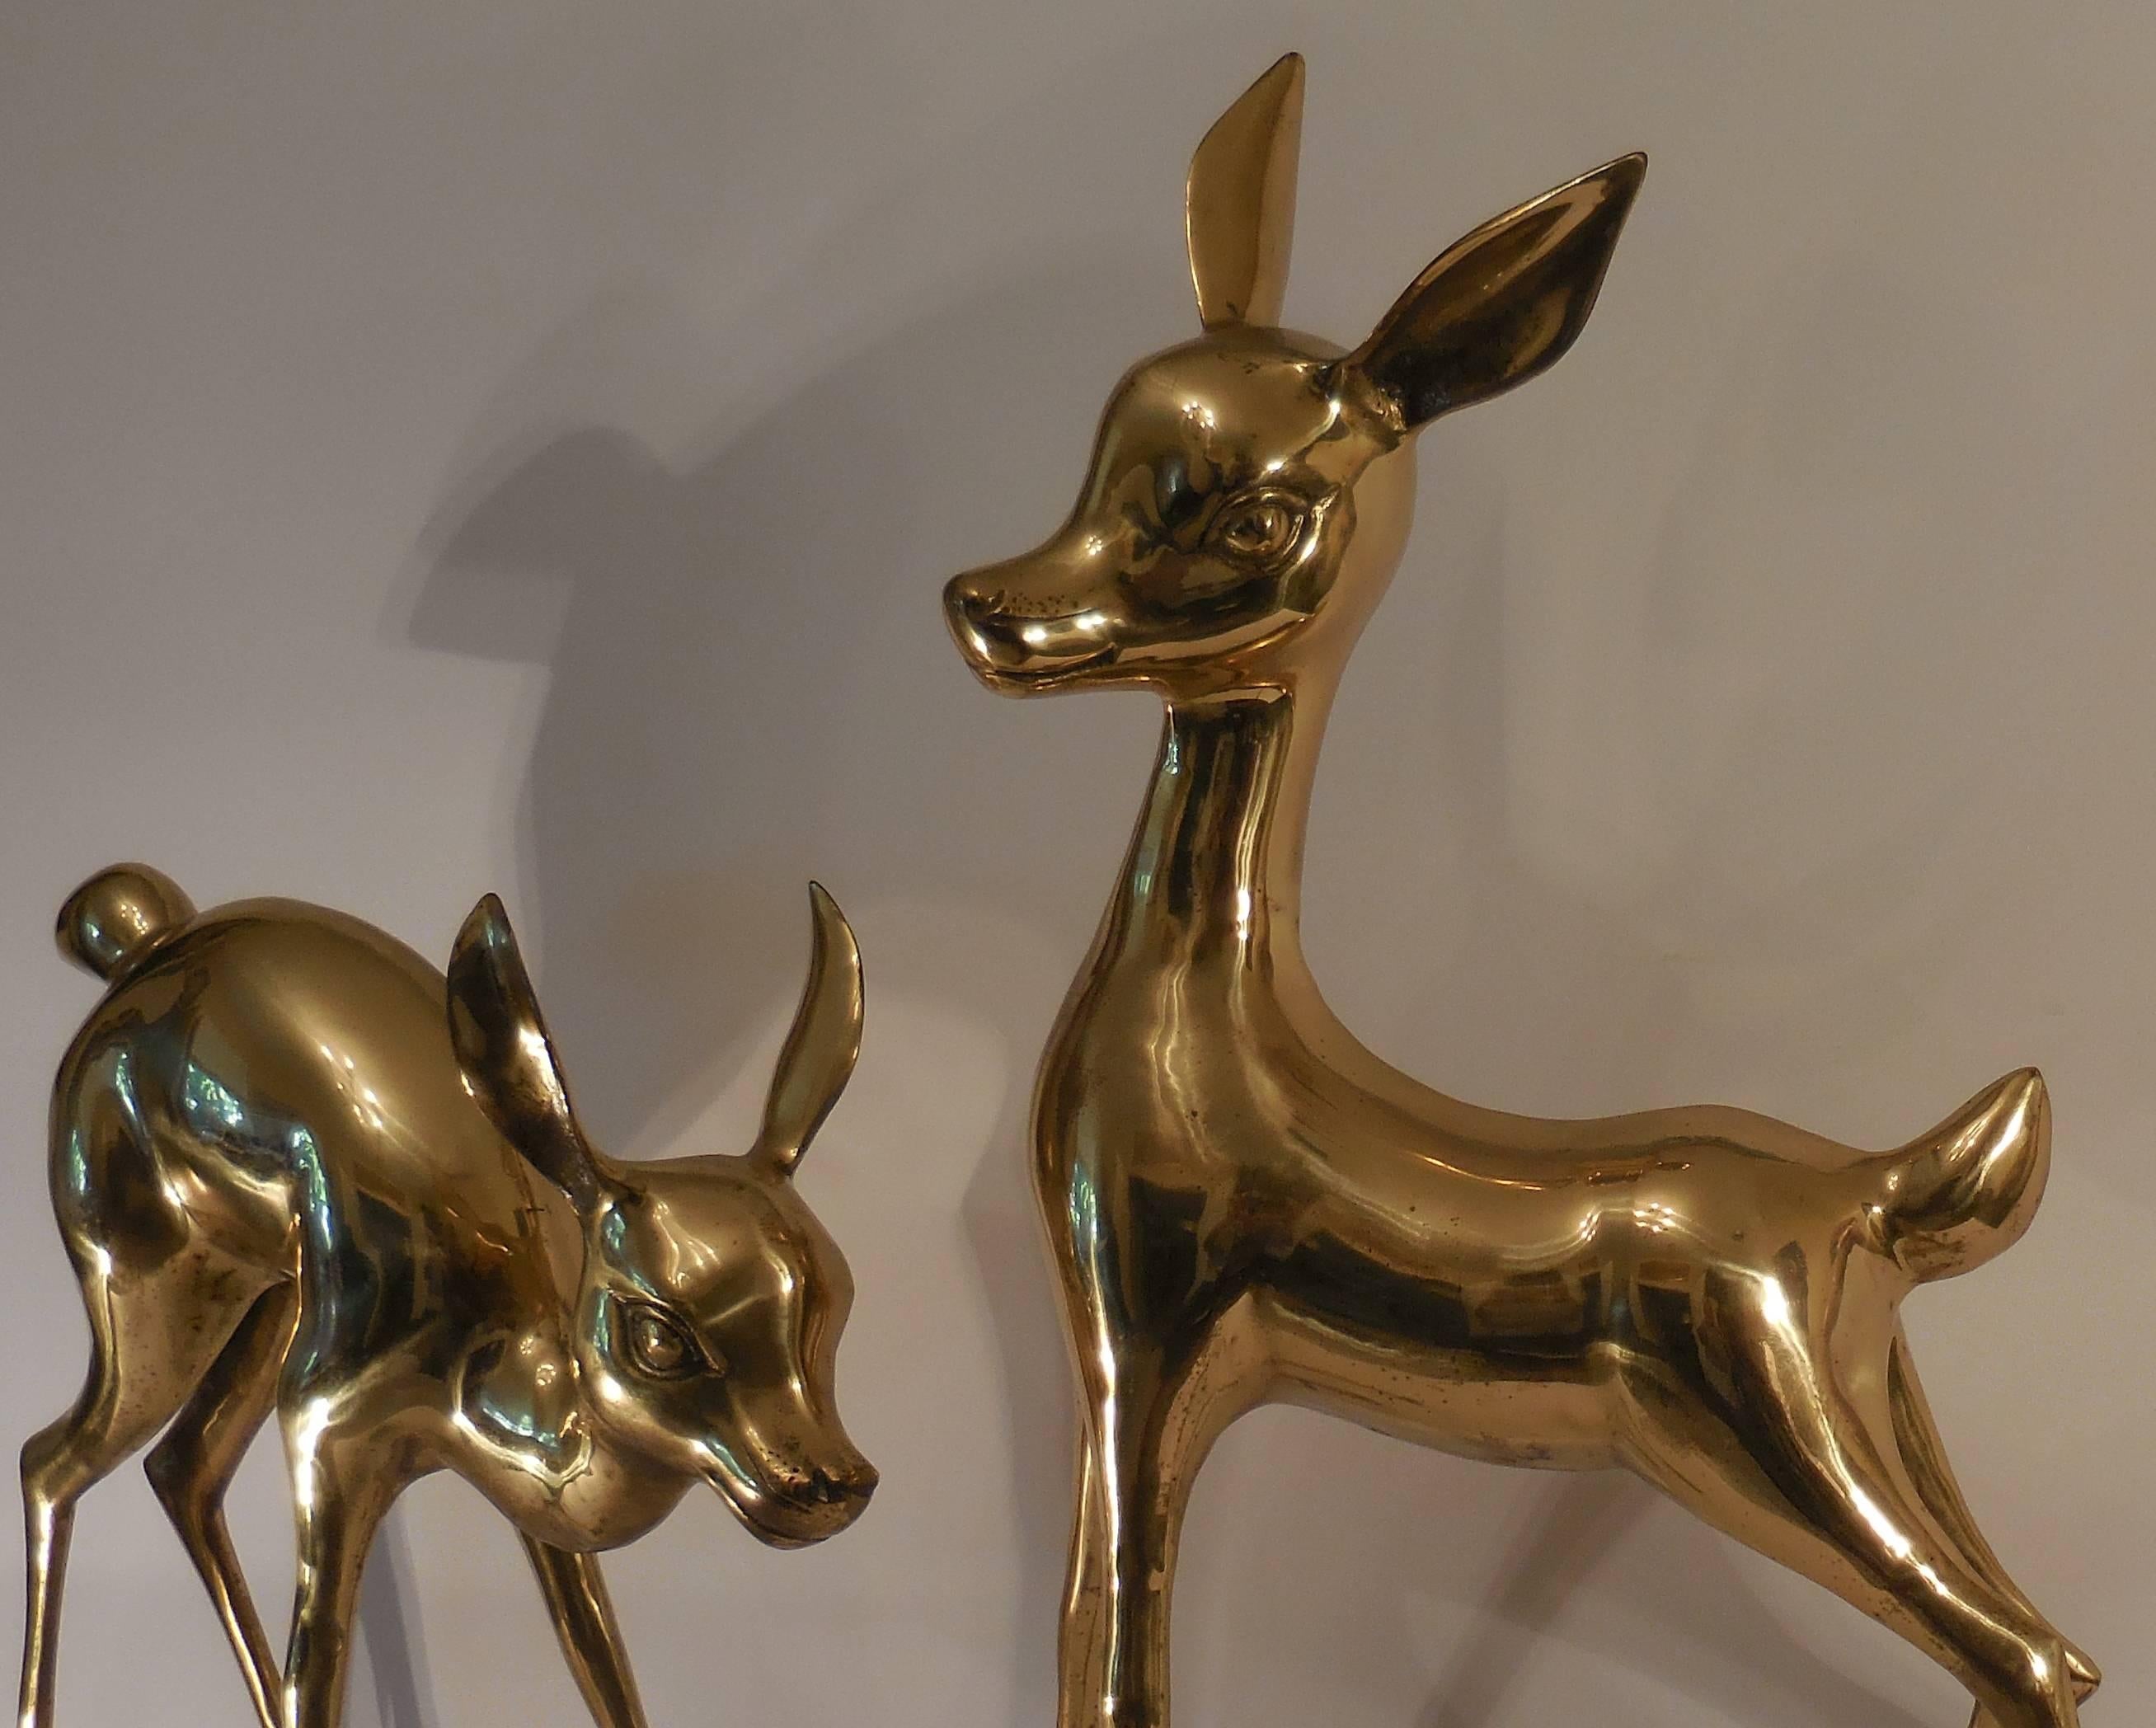 Adorably playful pair of baby deer or Bambi's made of brass nicely clean polish
Decoratively looking.
Great condition 
Size
1. 29